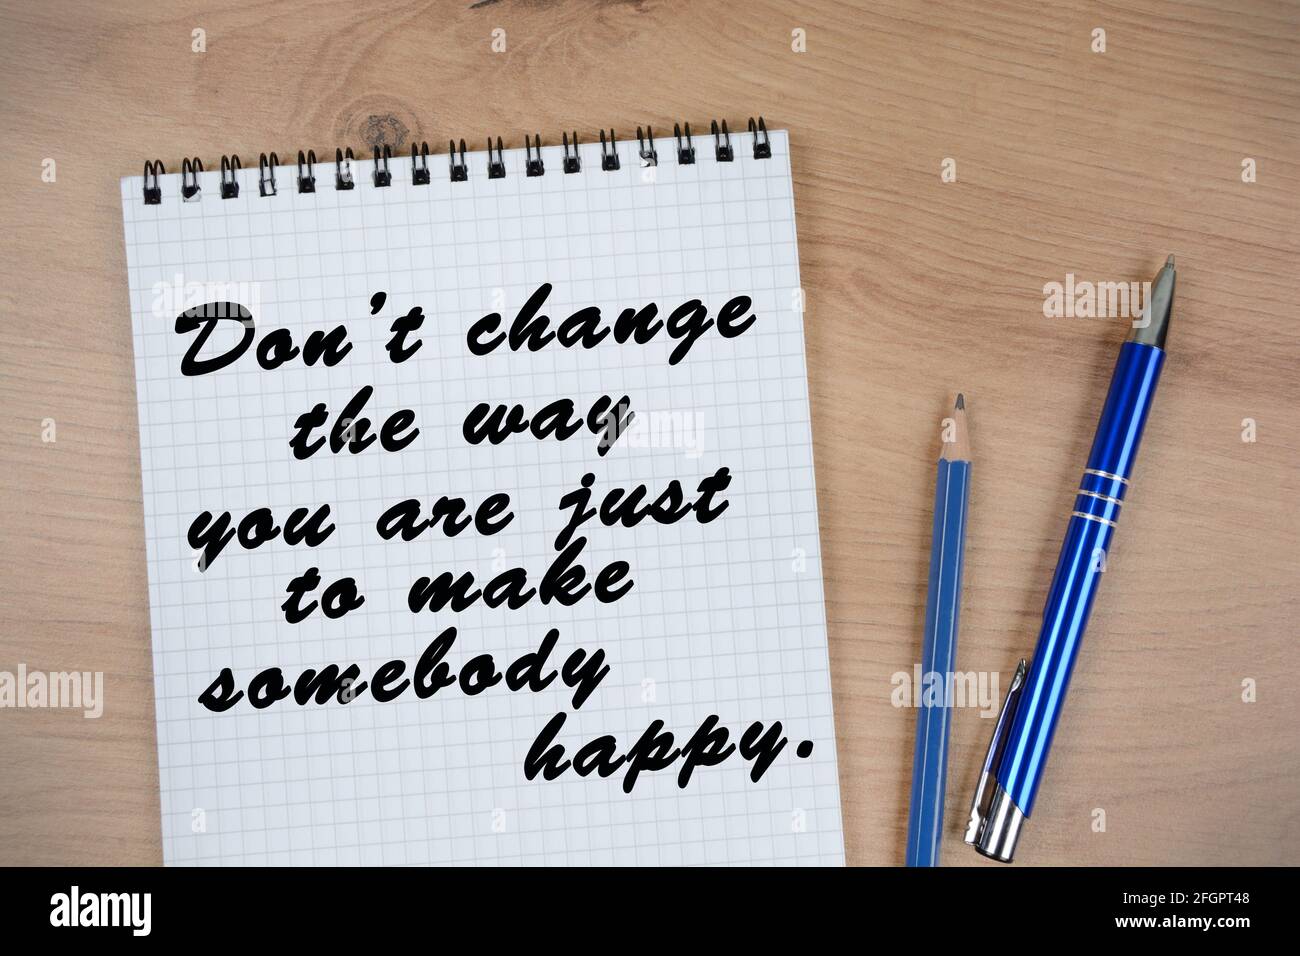 Don't change the way you are, just to make somebody happy words on notebook. Inspirational quote Stock Photo